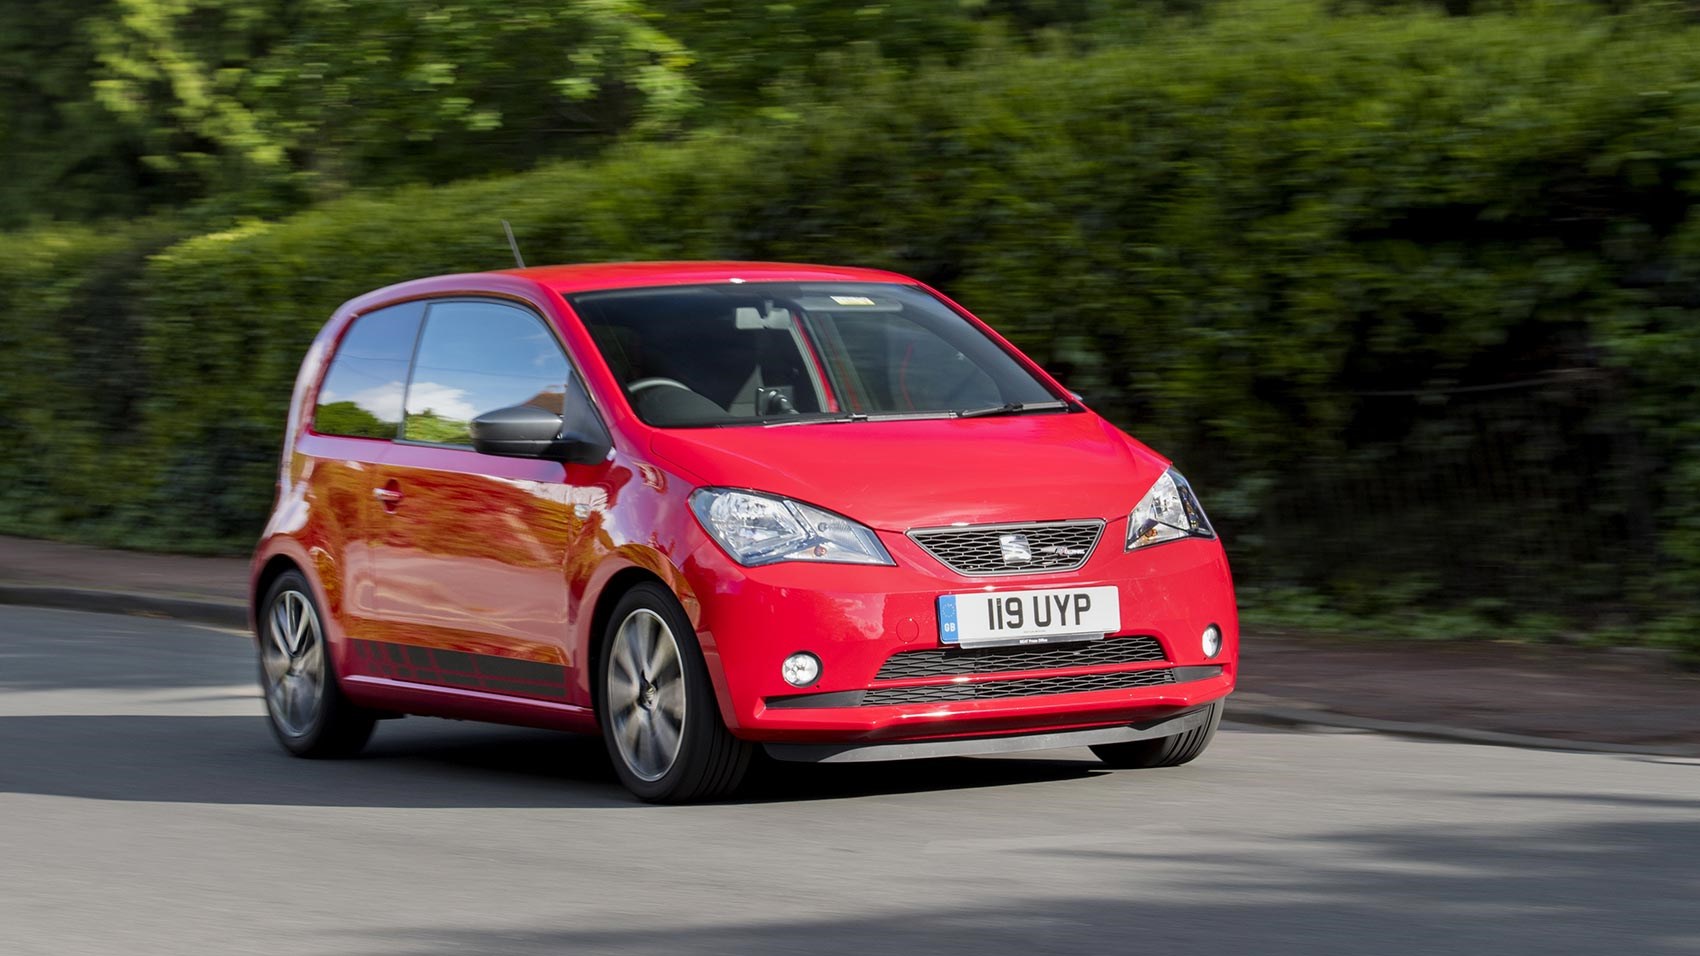 The new SEAT Mii by MANGO: specification and pictures